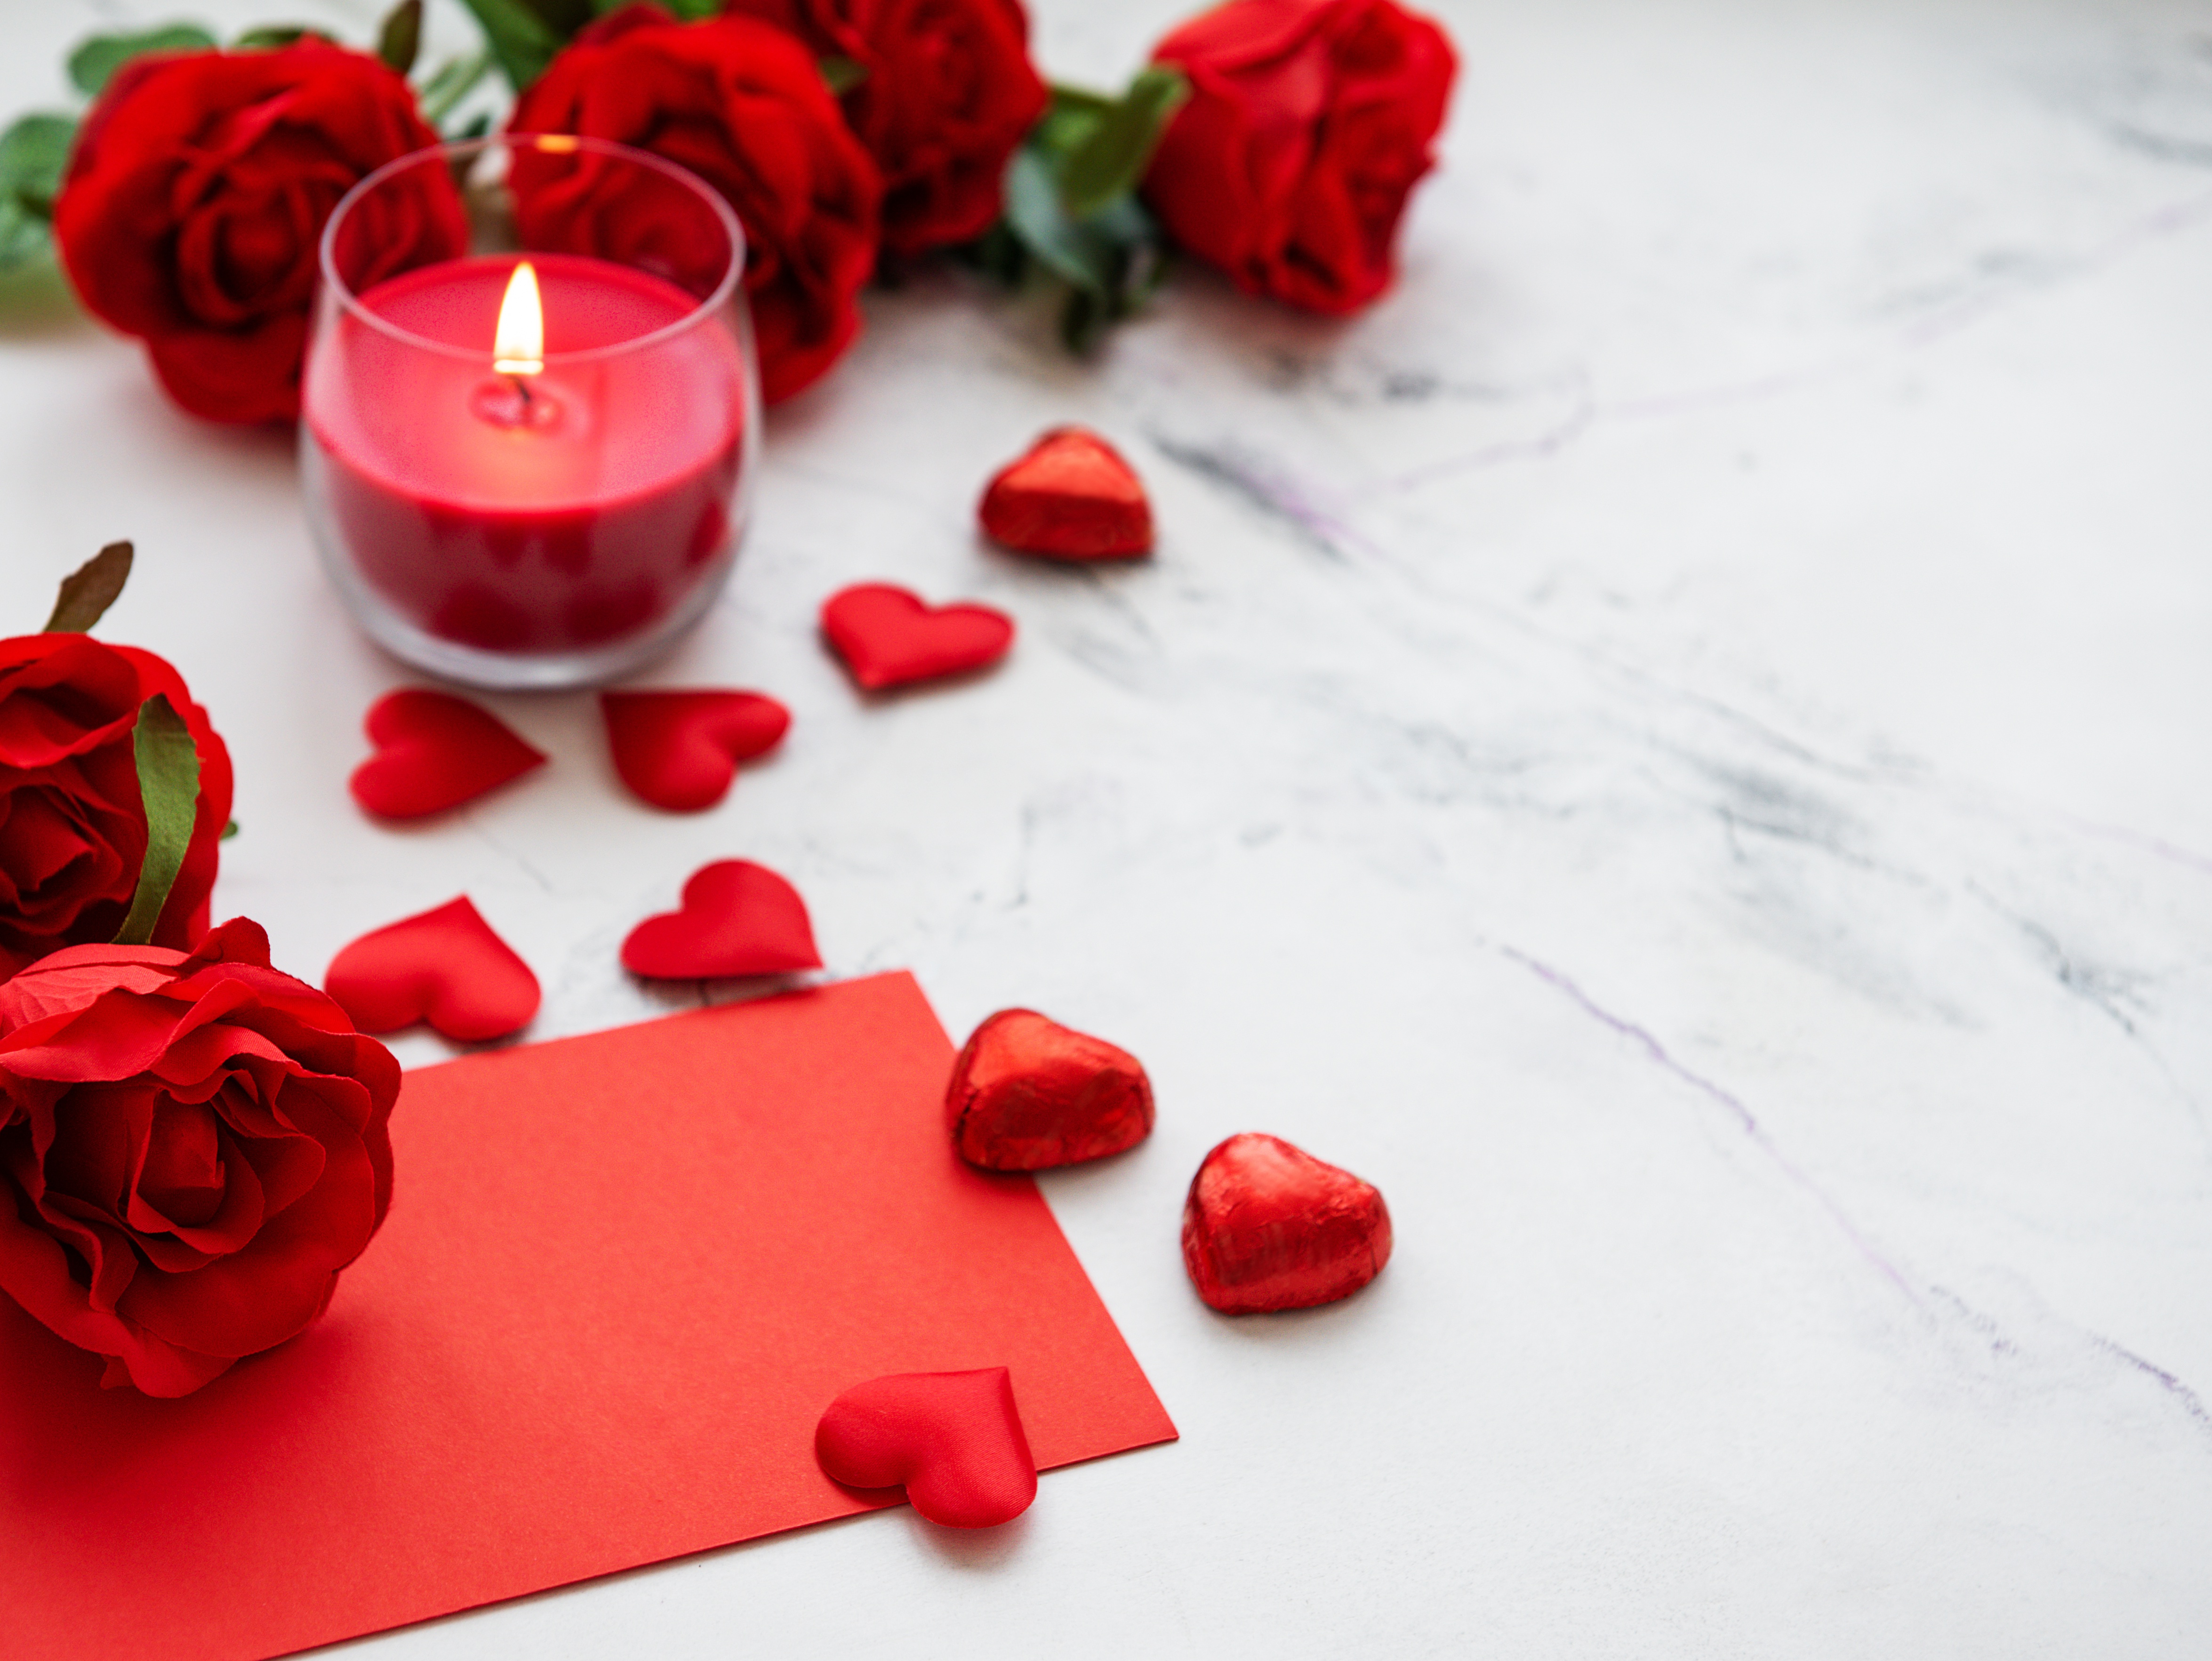 Candle Heart Shaped Red Flower Romantic Rose 4700x3529